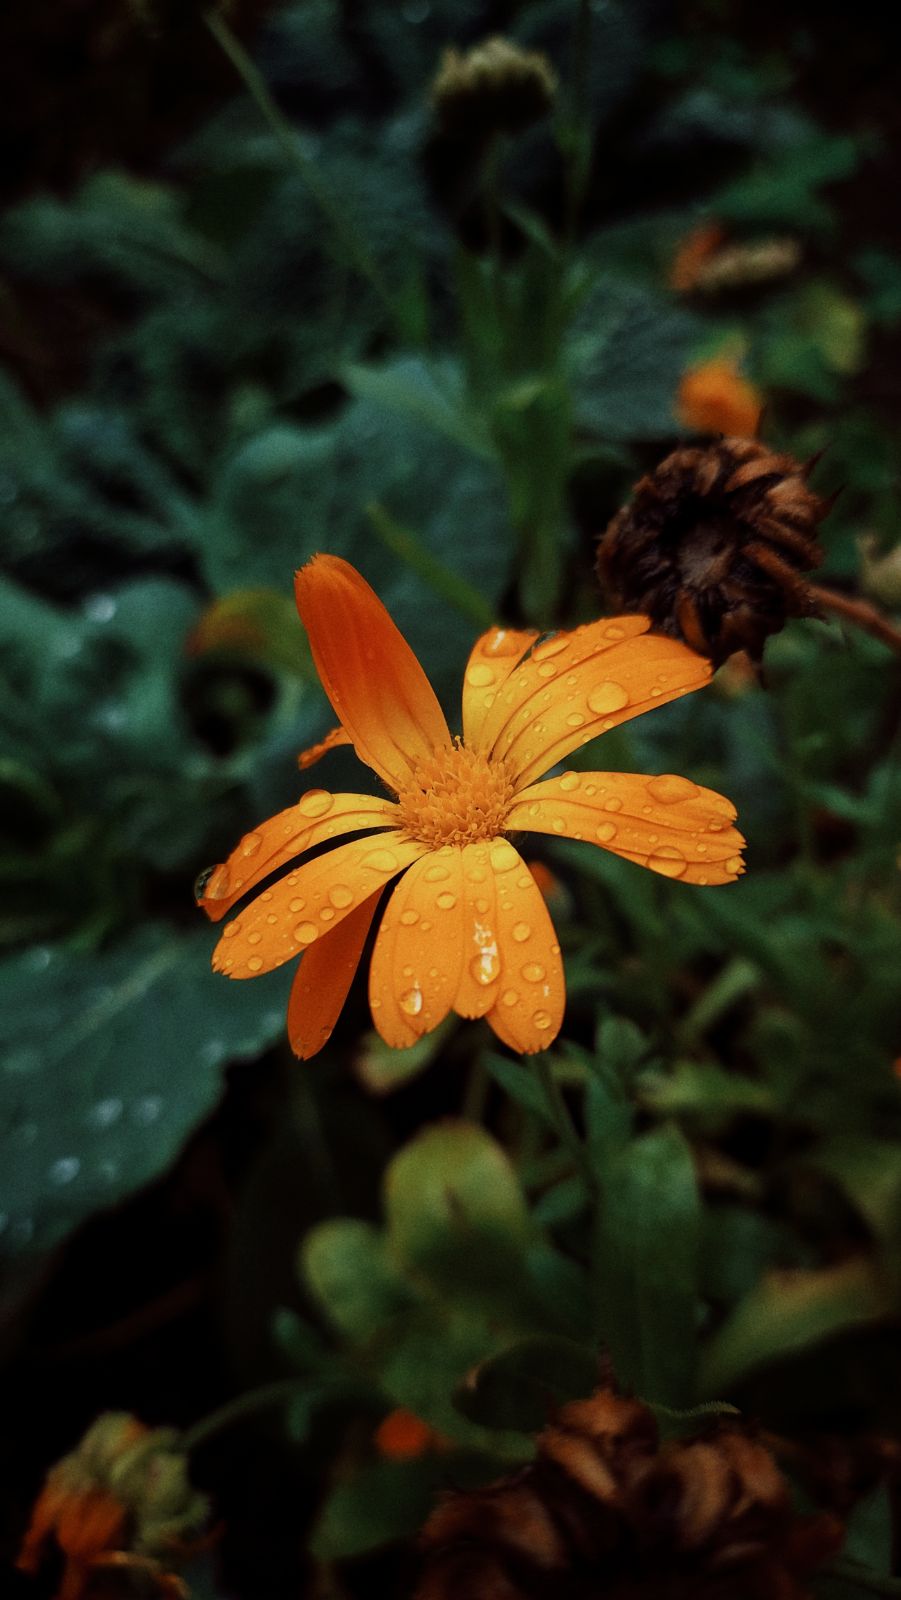 Raindrops on a yellow flower, in front of a dark green background.